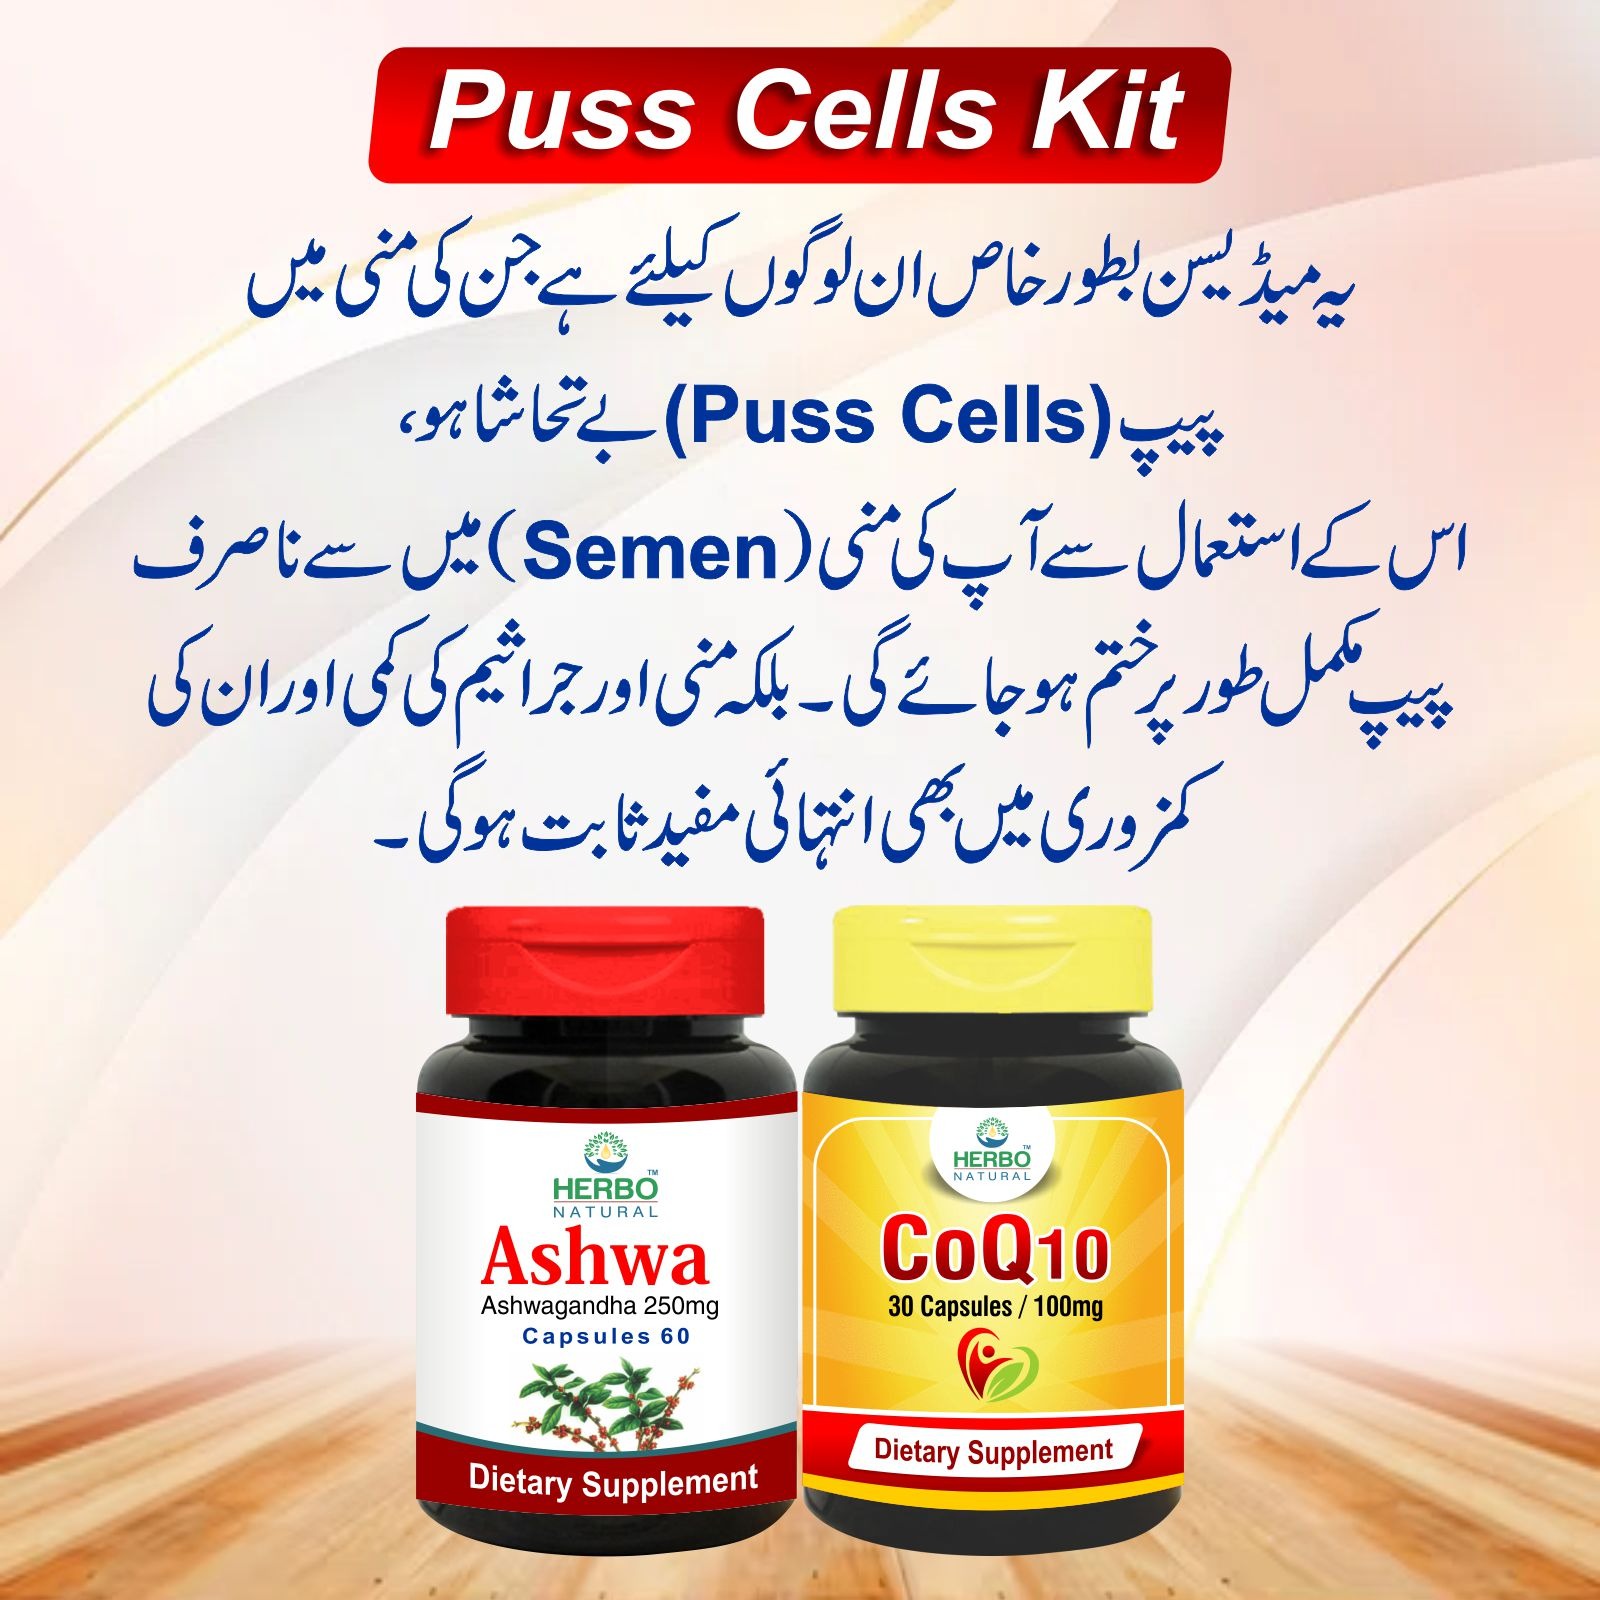 Puss cells solution